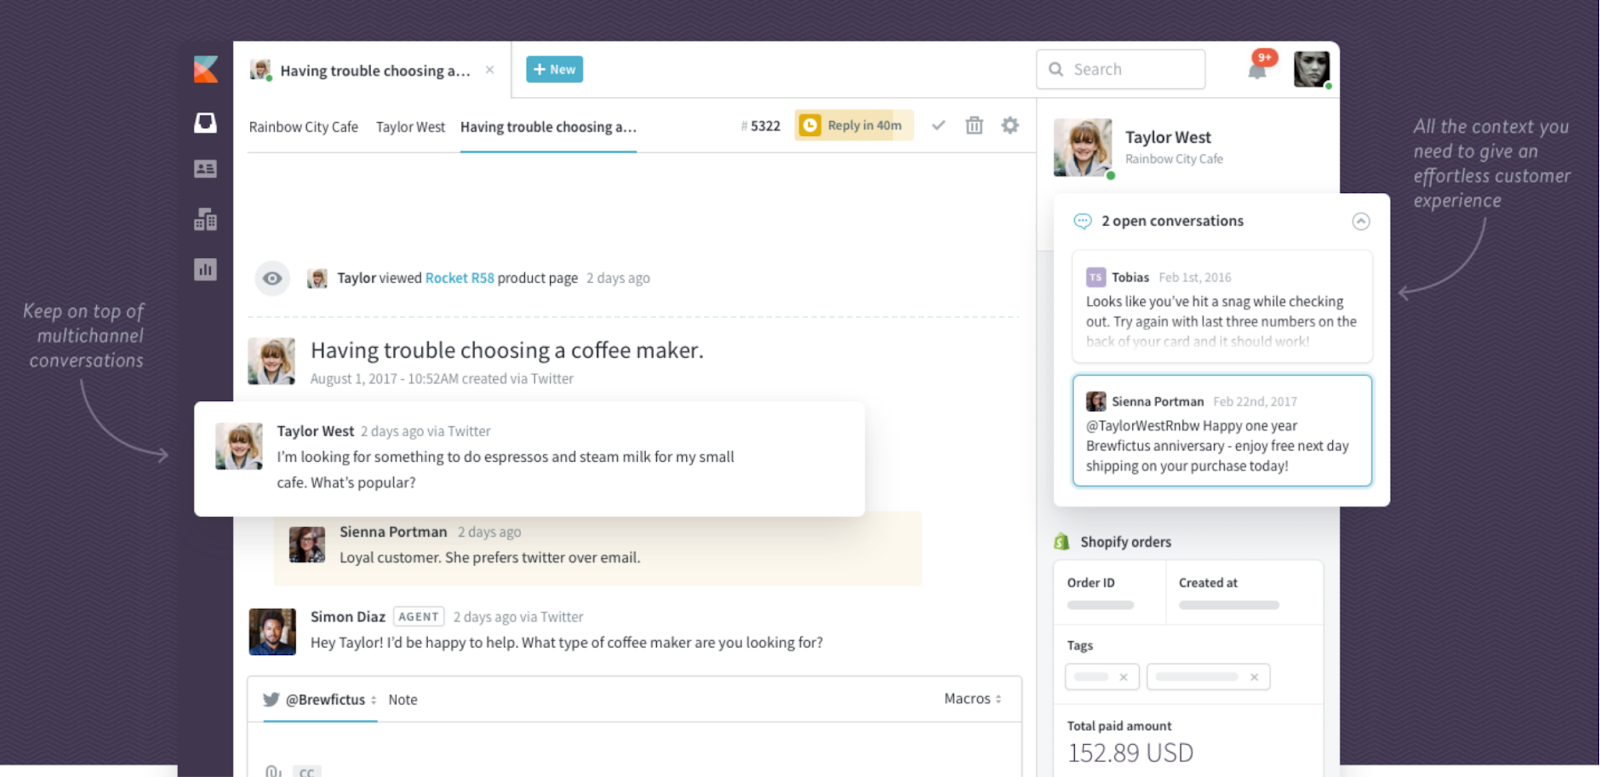 A screenshot of Kayako's customer support interface, illustrating a multi-channel conversation tracking system, a feature among Freshdesk alternatives. The main pane shows a customer named Taylor West from Rainbow City Cafe seeking advice on choosing a coffee maker via Twitter. On the right, a customer profile with past interactions and Shopify order details provides context for the support agent. The agent has responded directly within the platform, exemplifying Kayako's ability to streamline customer engagement across different channels.